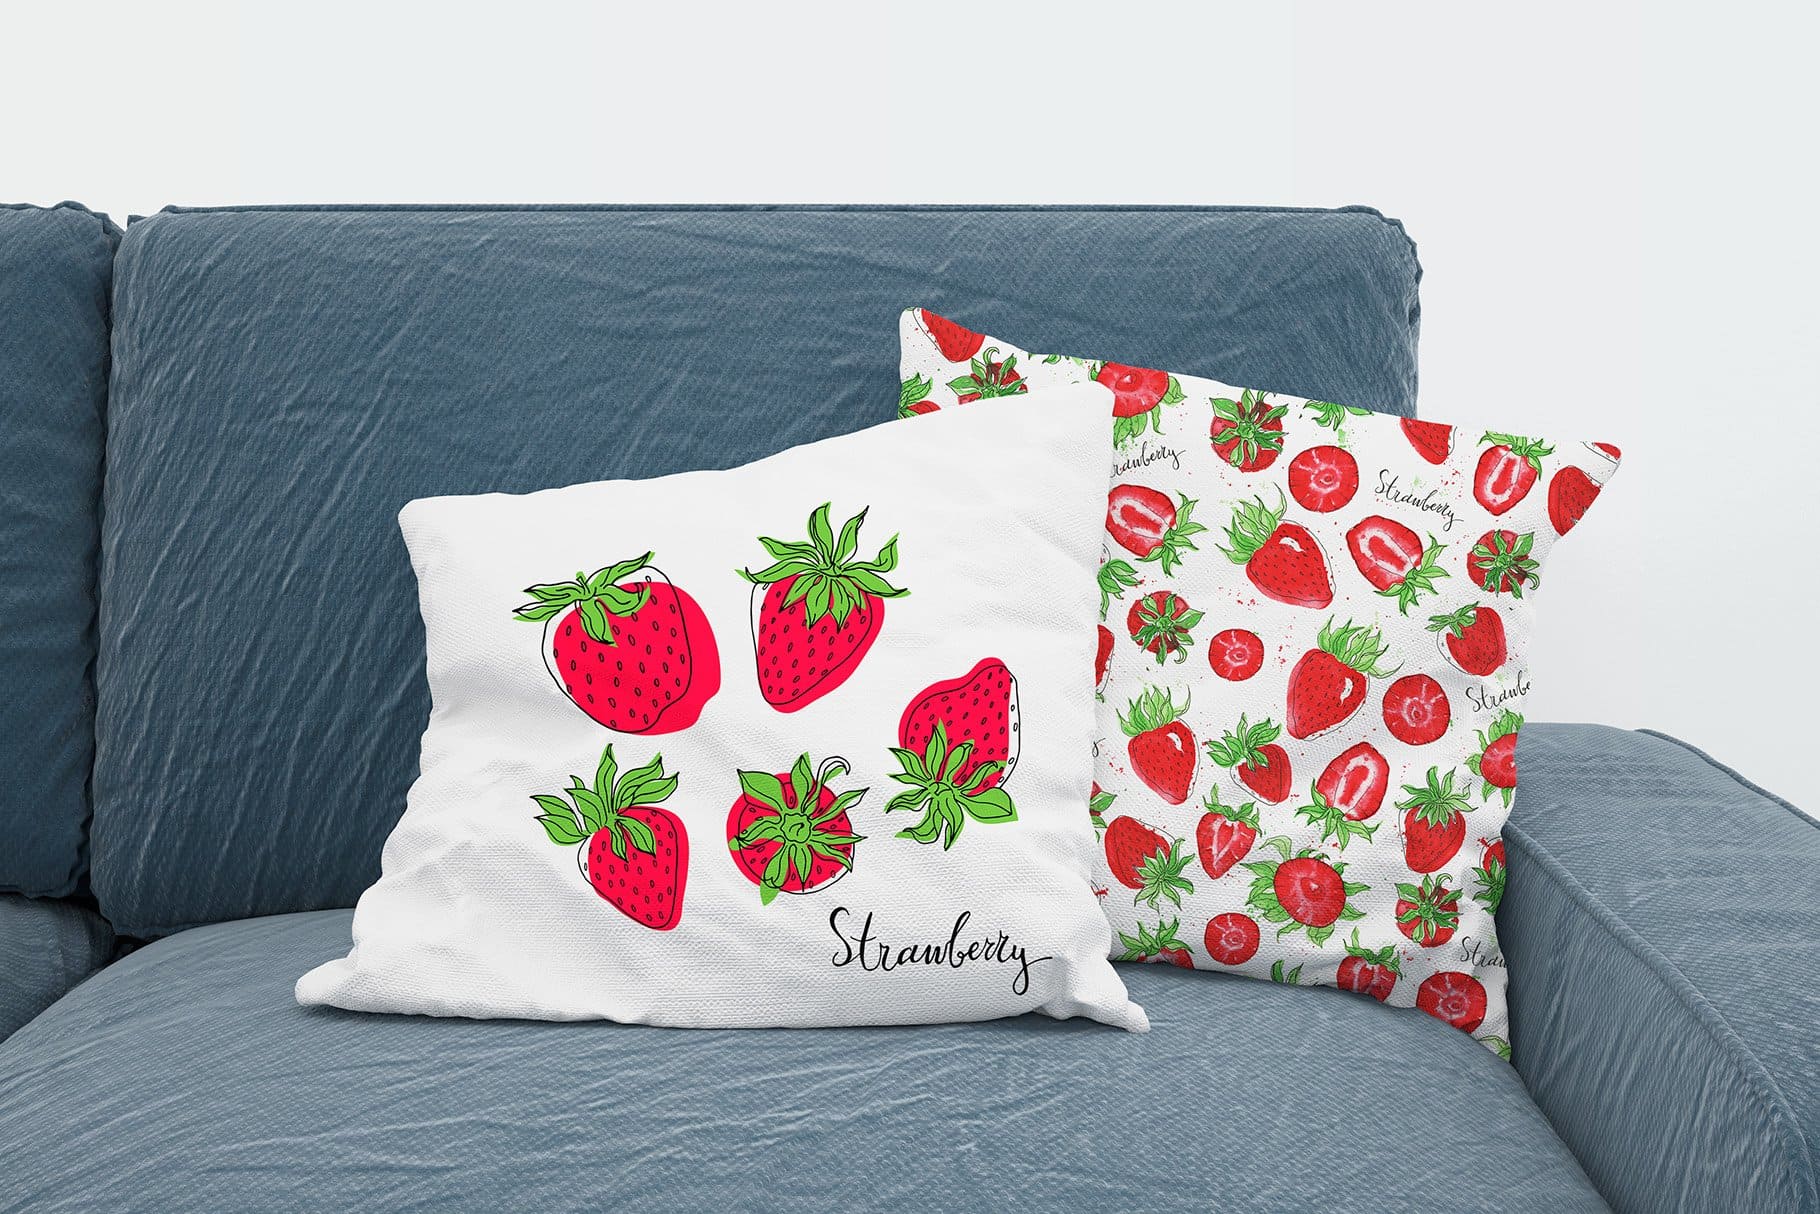 Two pillows, one with a large strawberry print and the other with a small drawn strawberry.